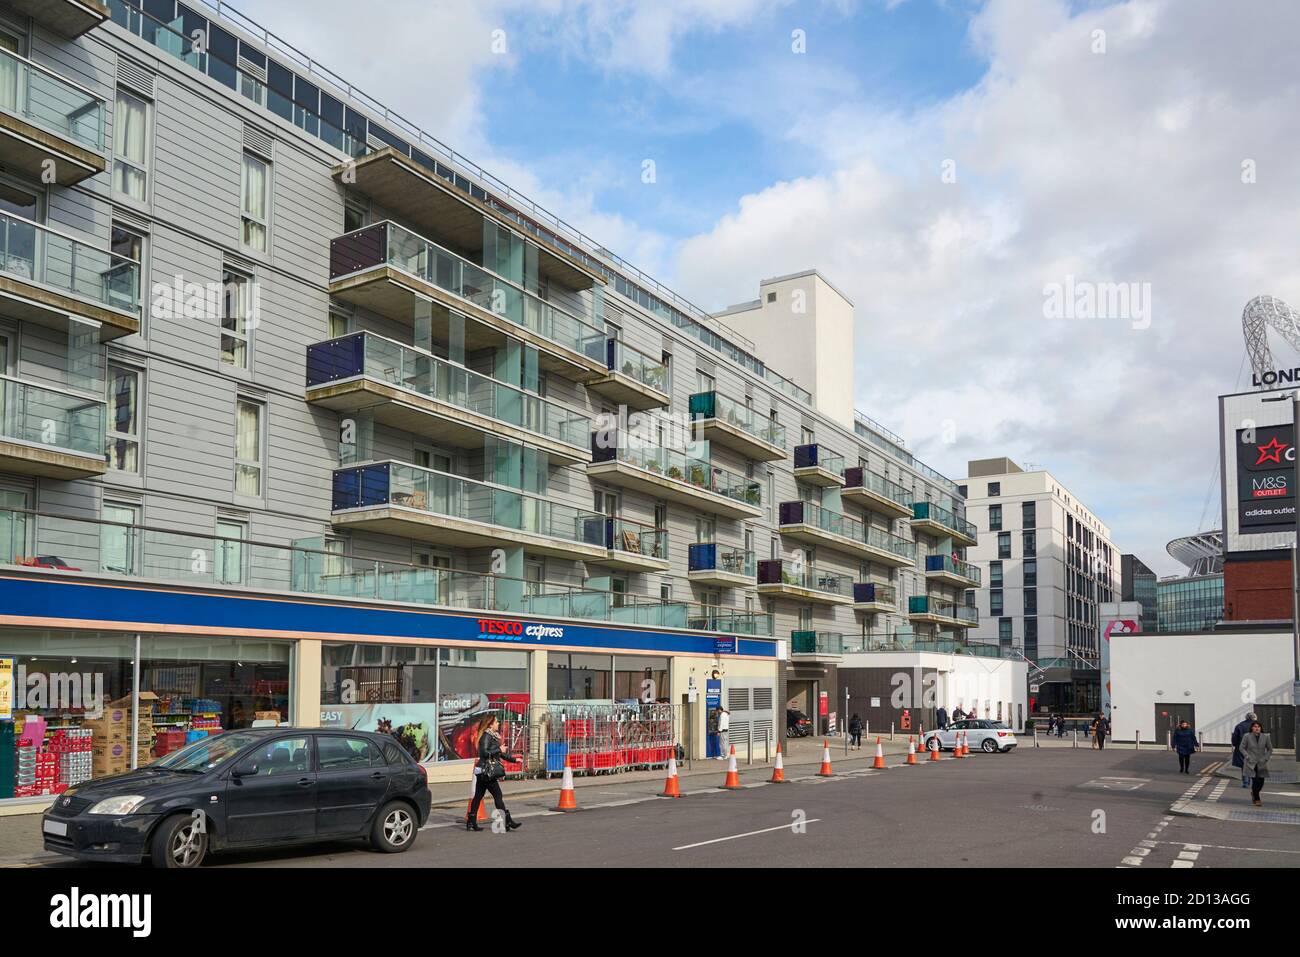 Street Scene, showing a Tesco Metro with apartments over, Wembley, North London, UK Stock Photo